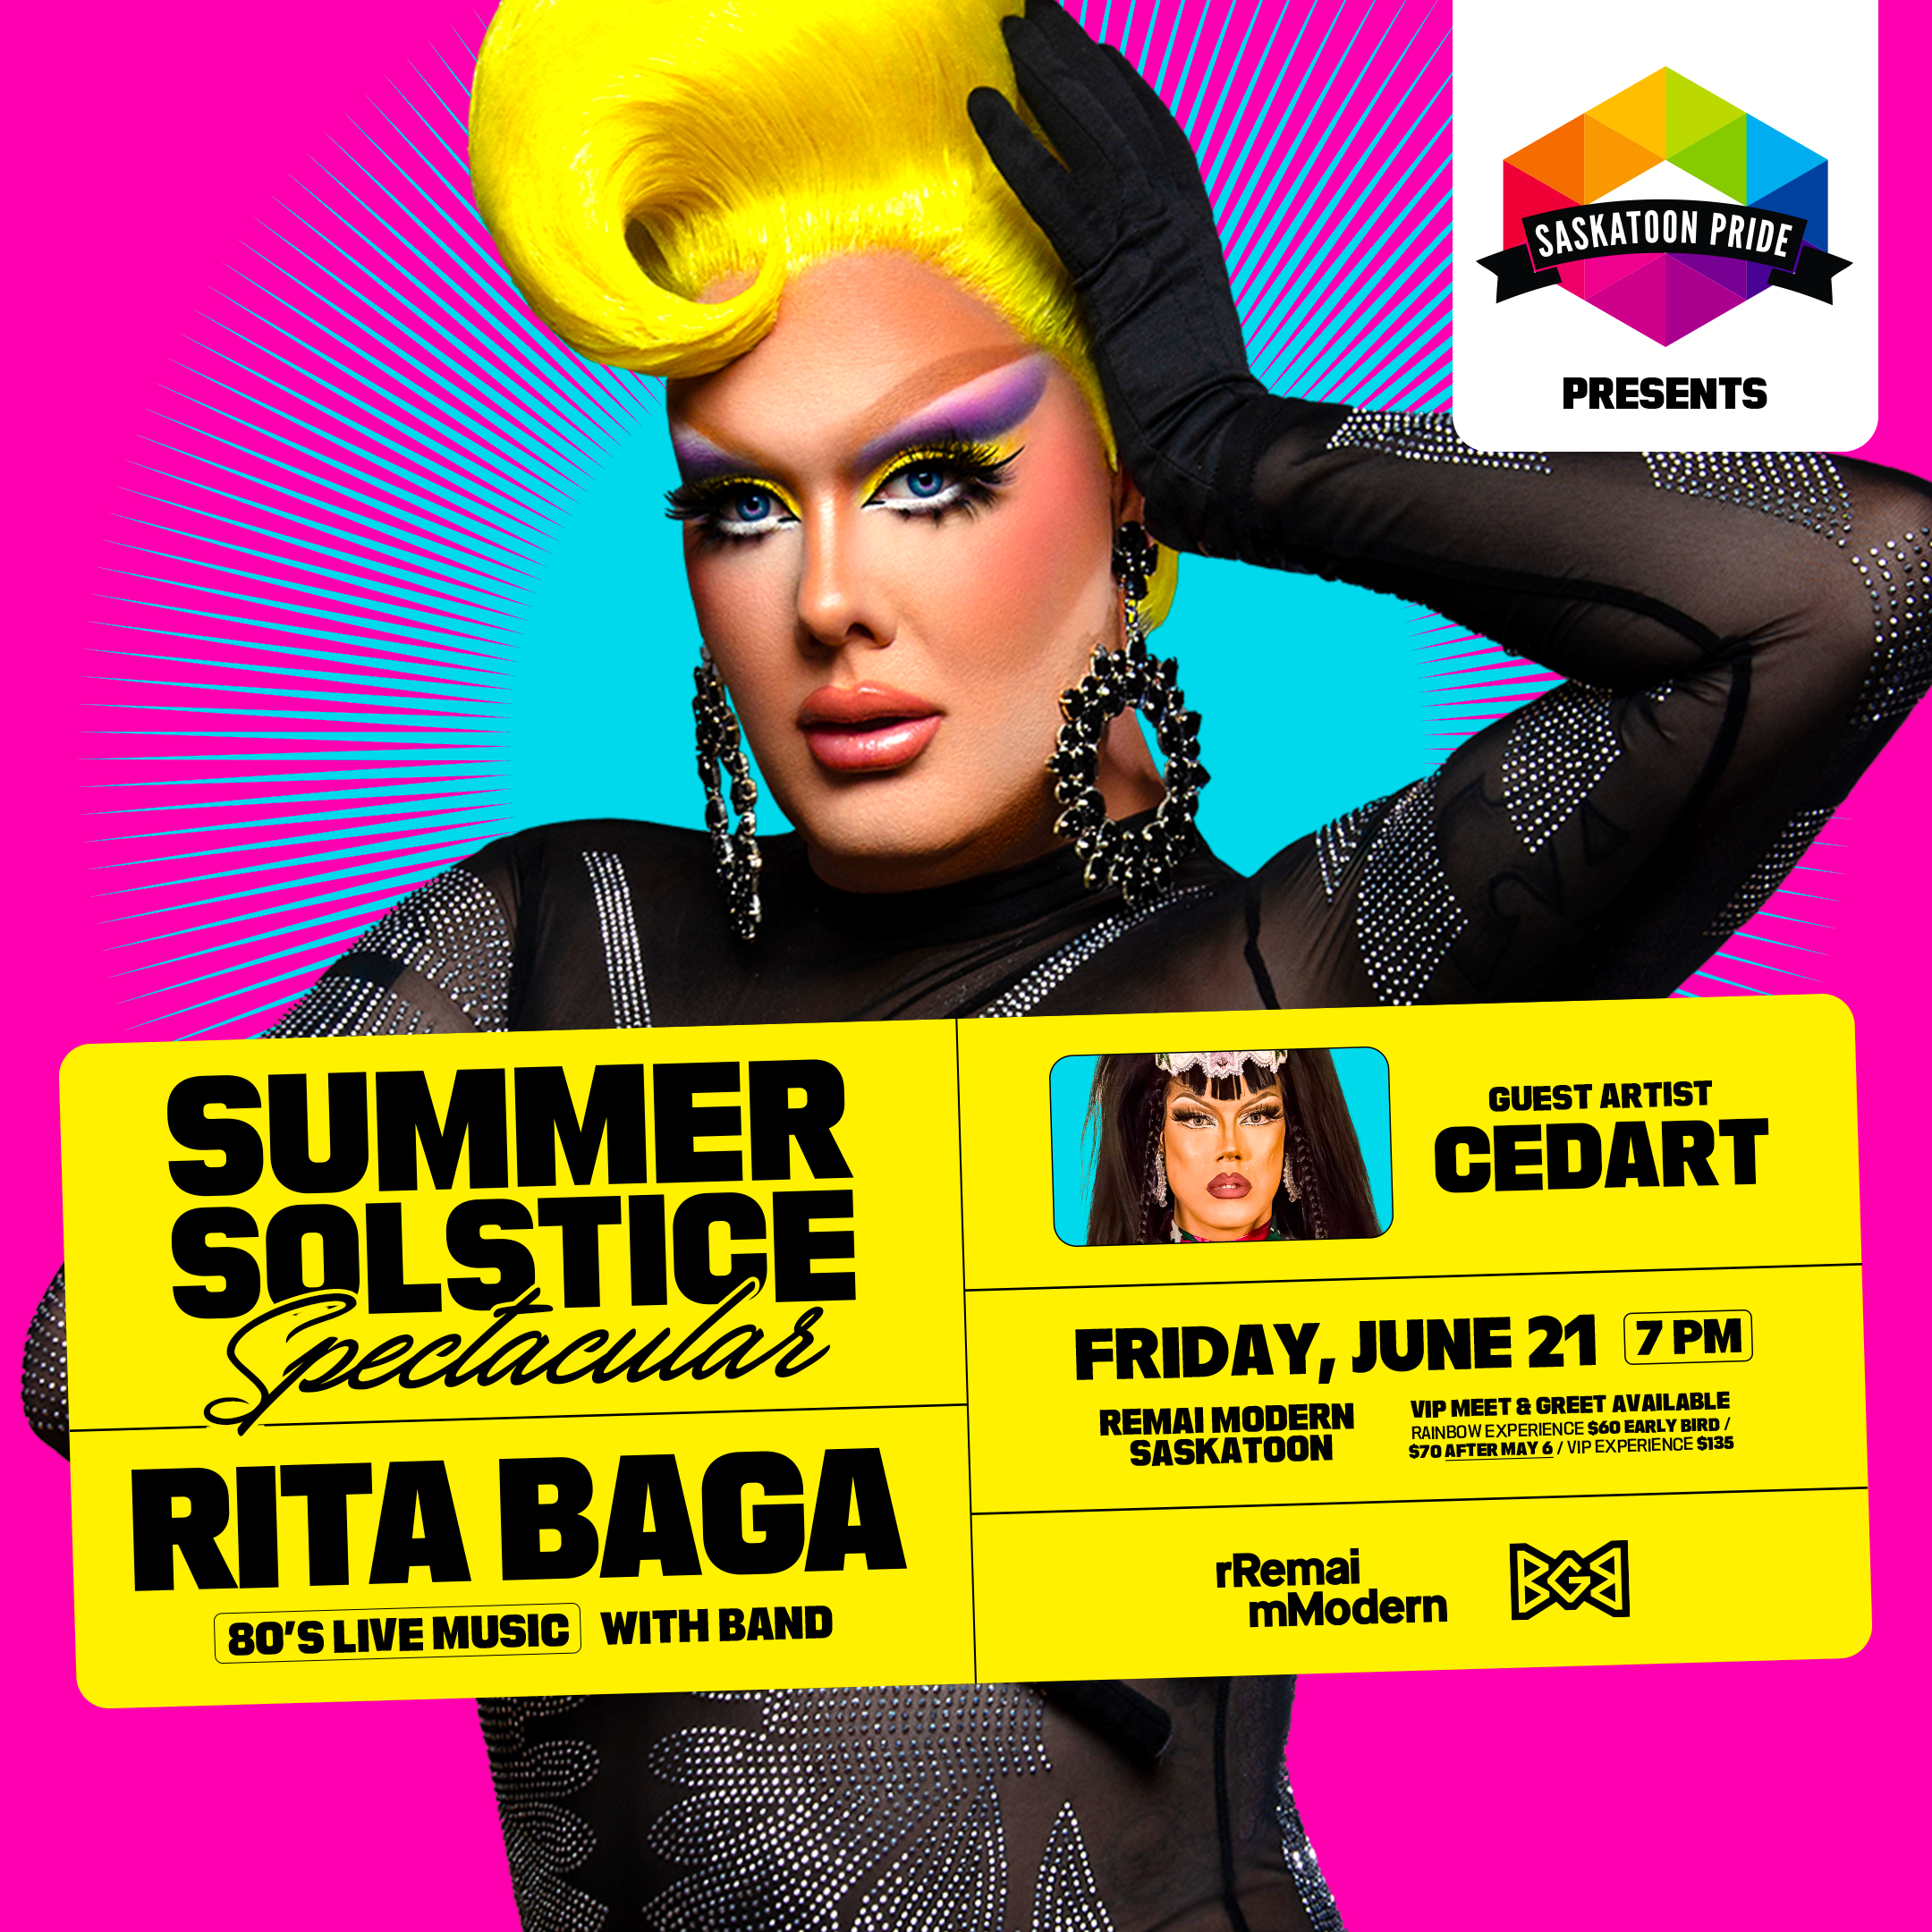 Graphic showing Rita Baga and details of Summer Solstice Spectacular on it.